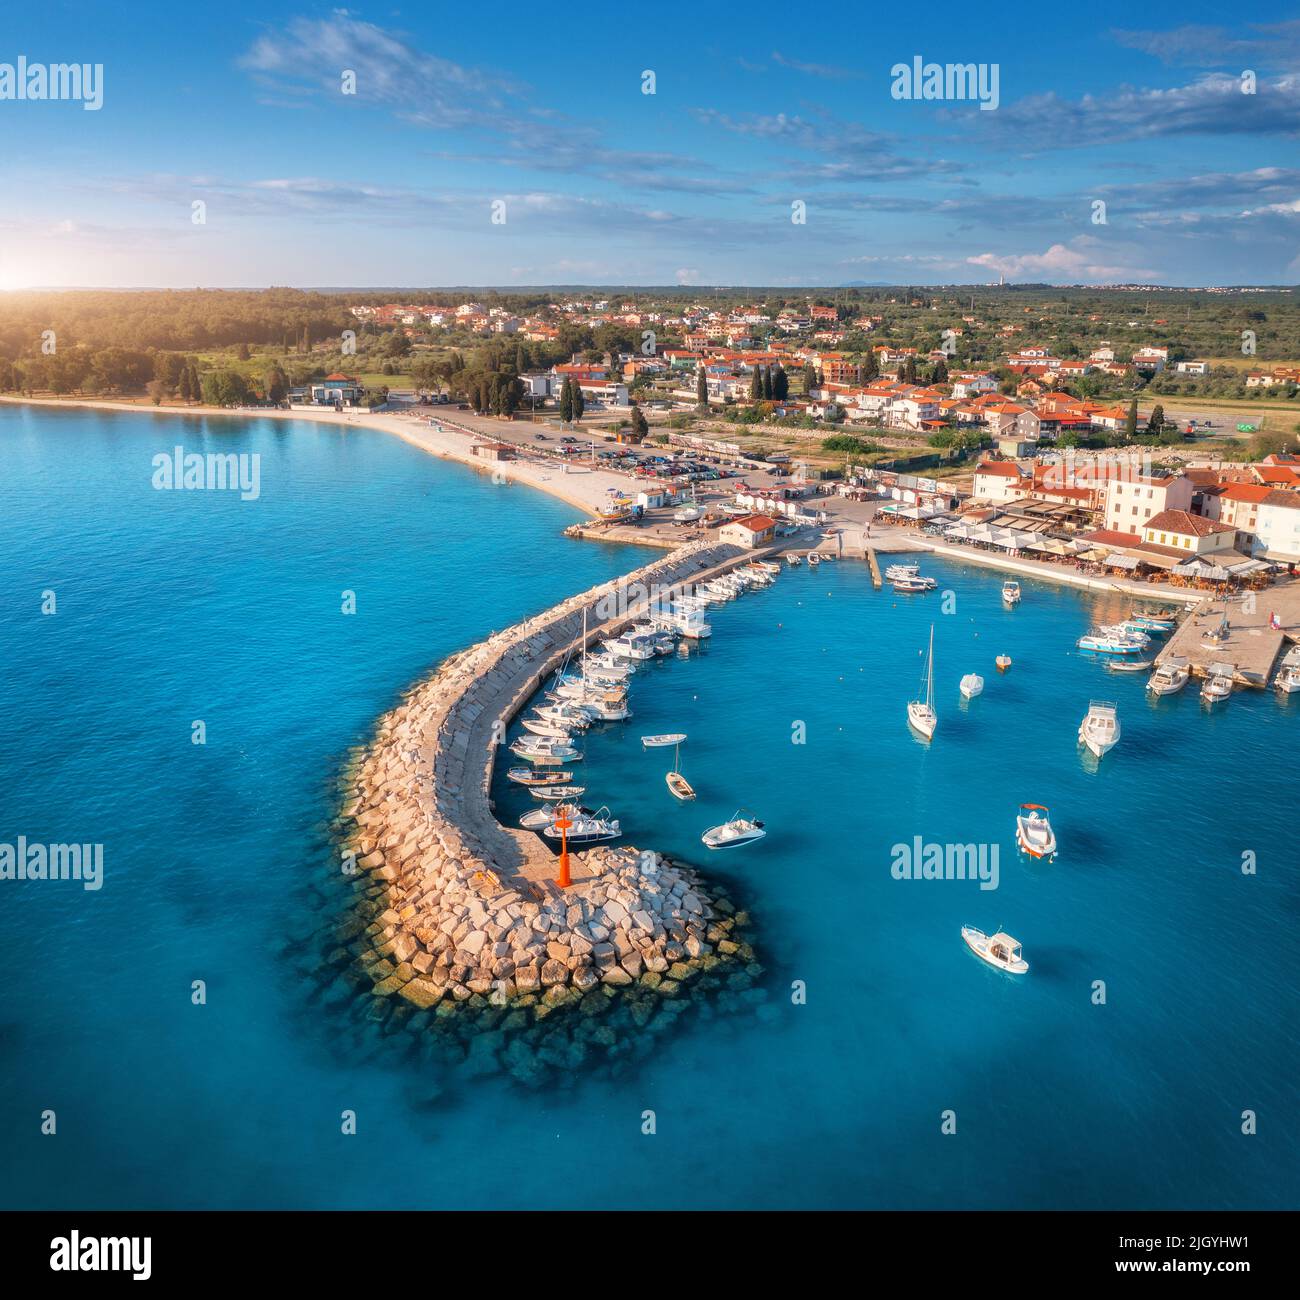 Aerial view of boats and yachts in dock, breakwater and blue sea Stock Photo